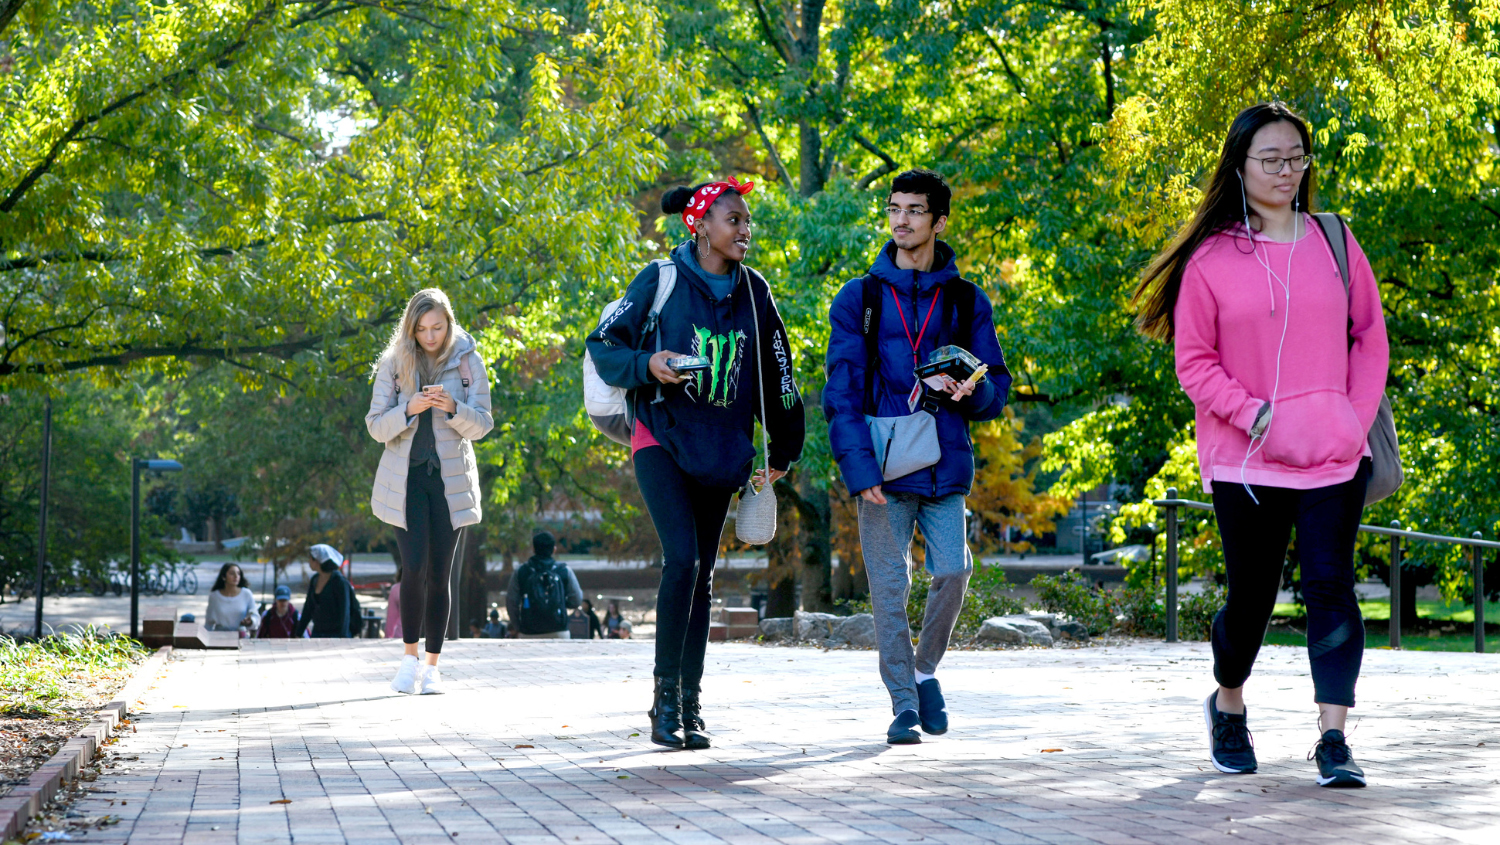 Students head from the Brickyard in the direction of Hillsborough Street on a pleasant November 2019 afternoon.